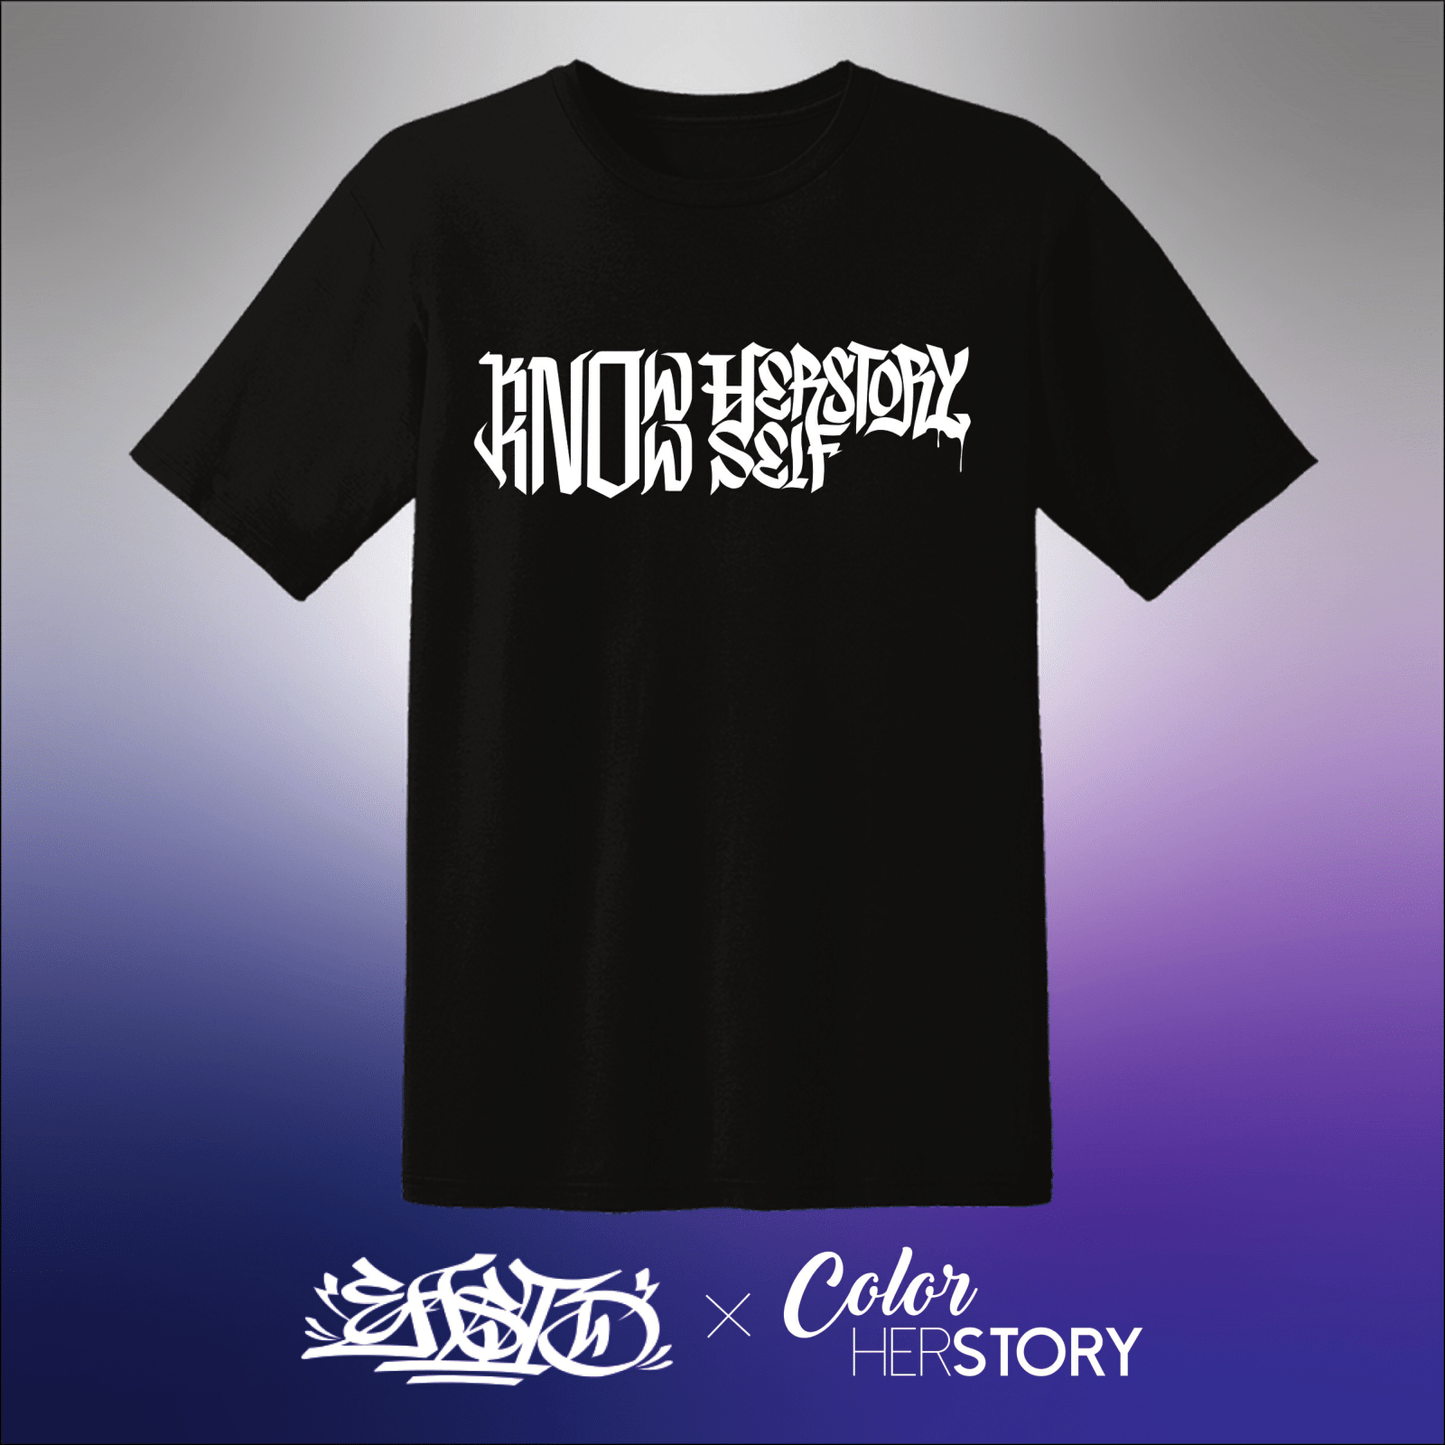 East Three x CH: T-Shirt "Know Herstory Self"